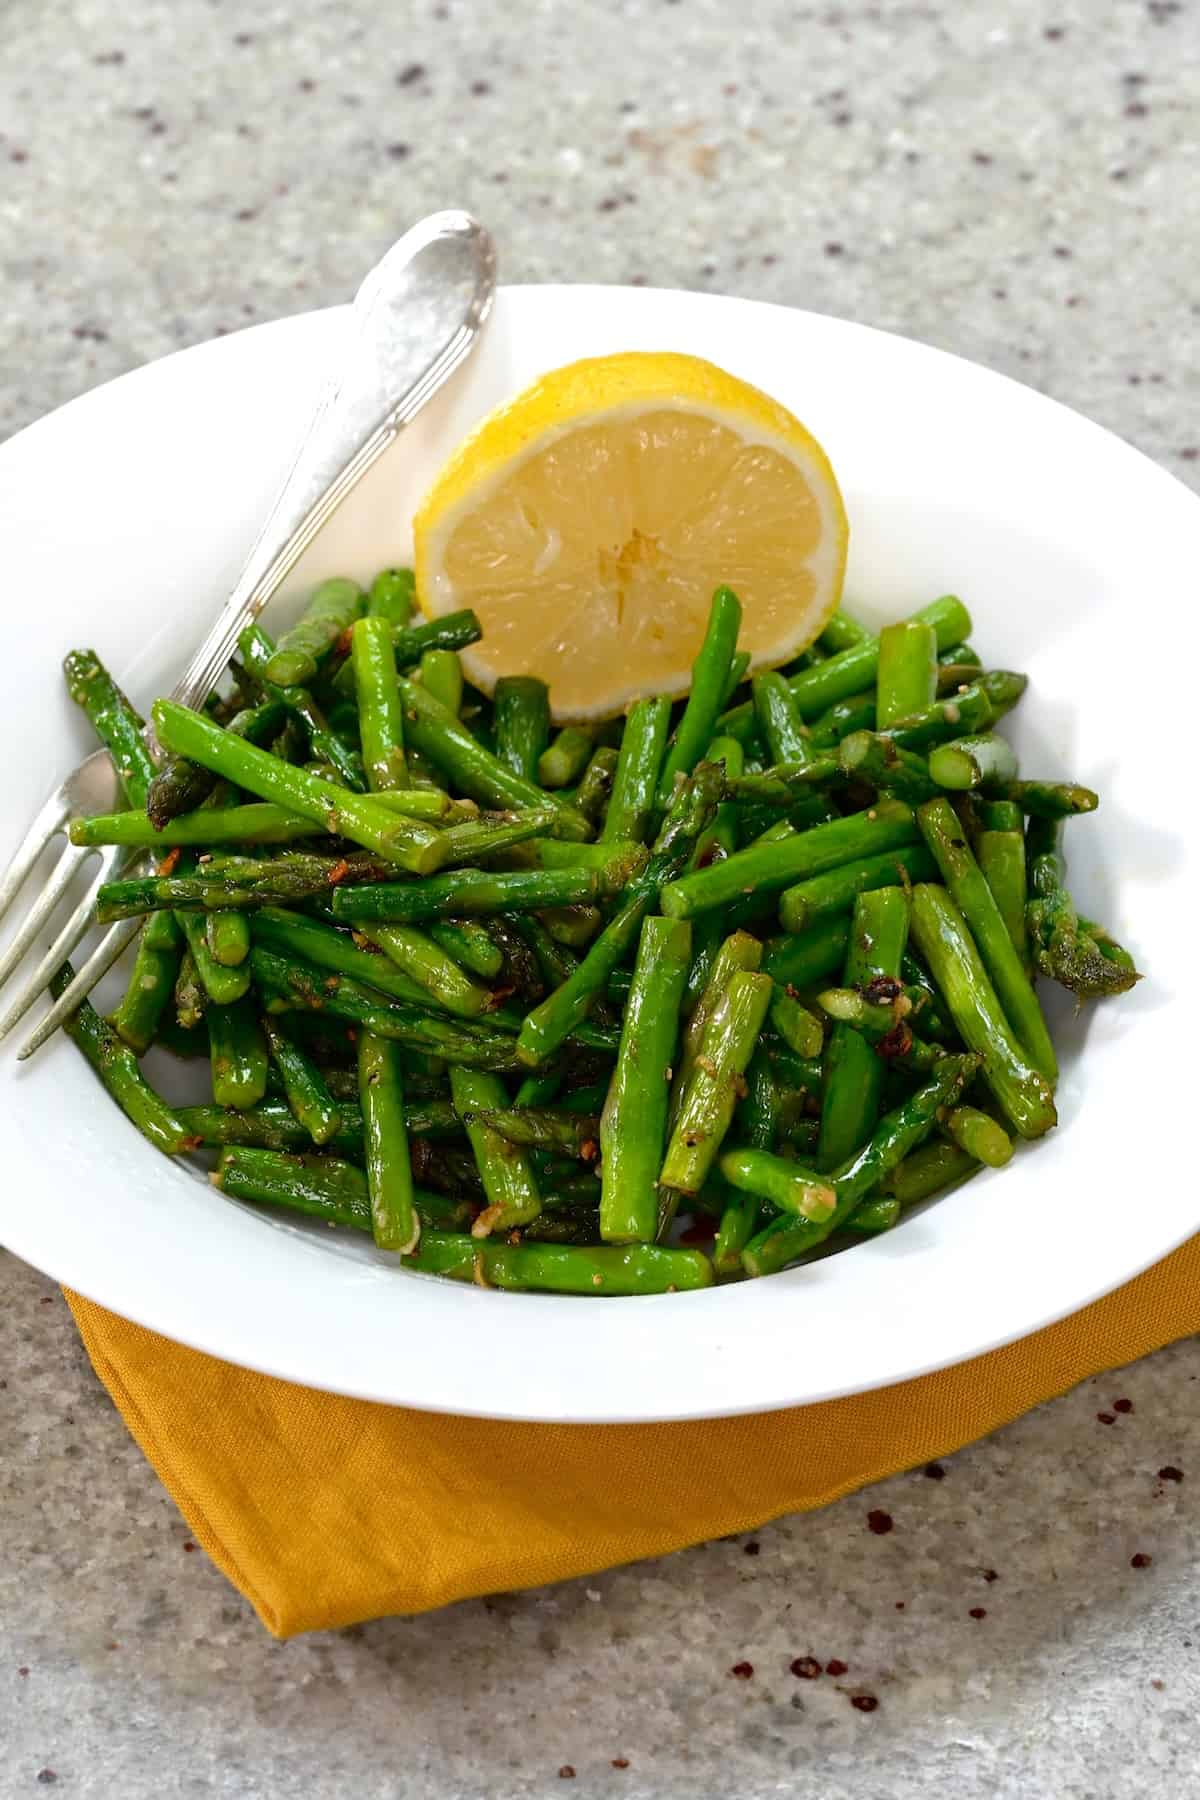 A serving of sautéed asparagus with a lemon slice in a white plate